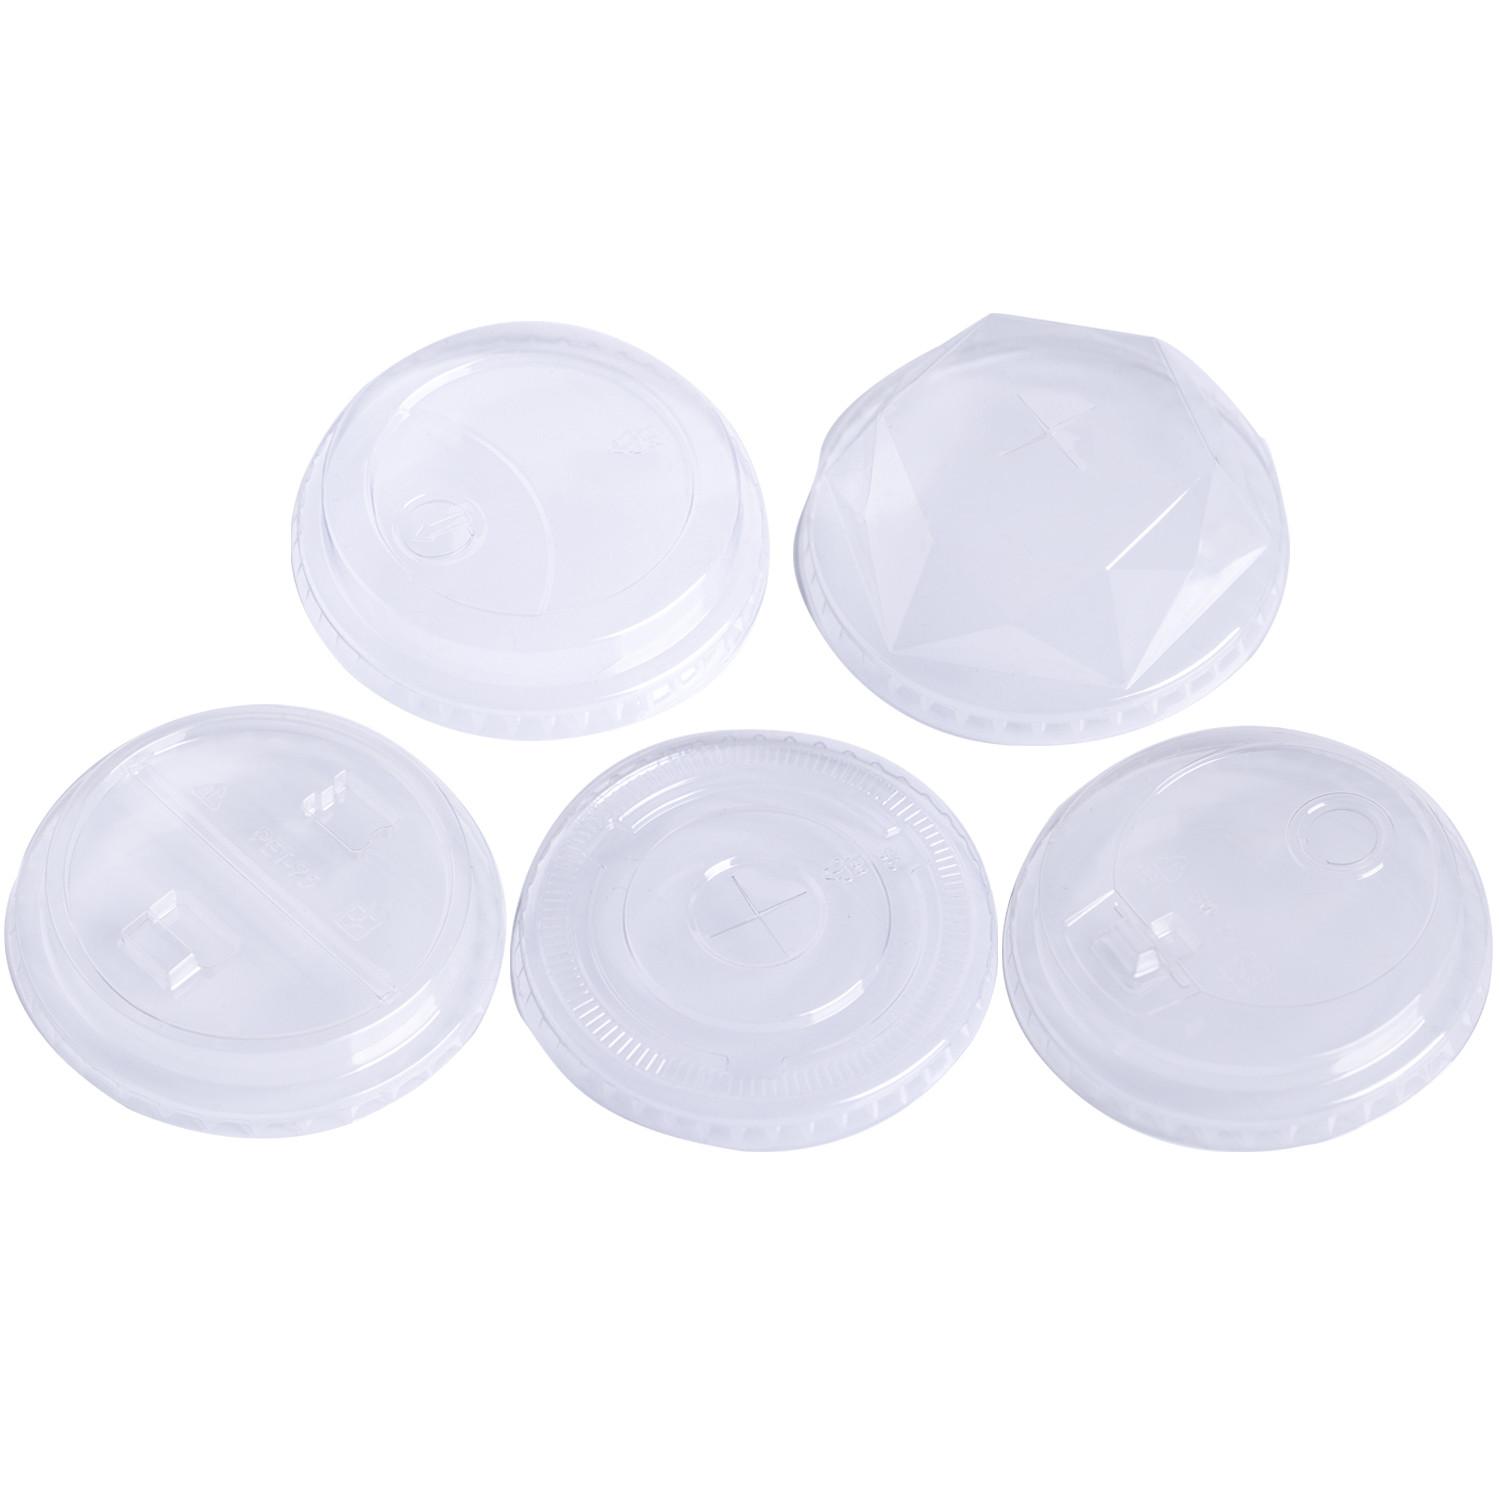 Various types of lids